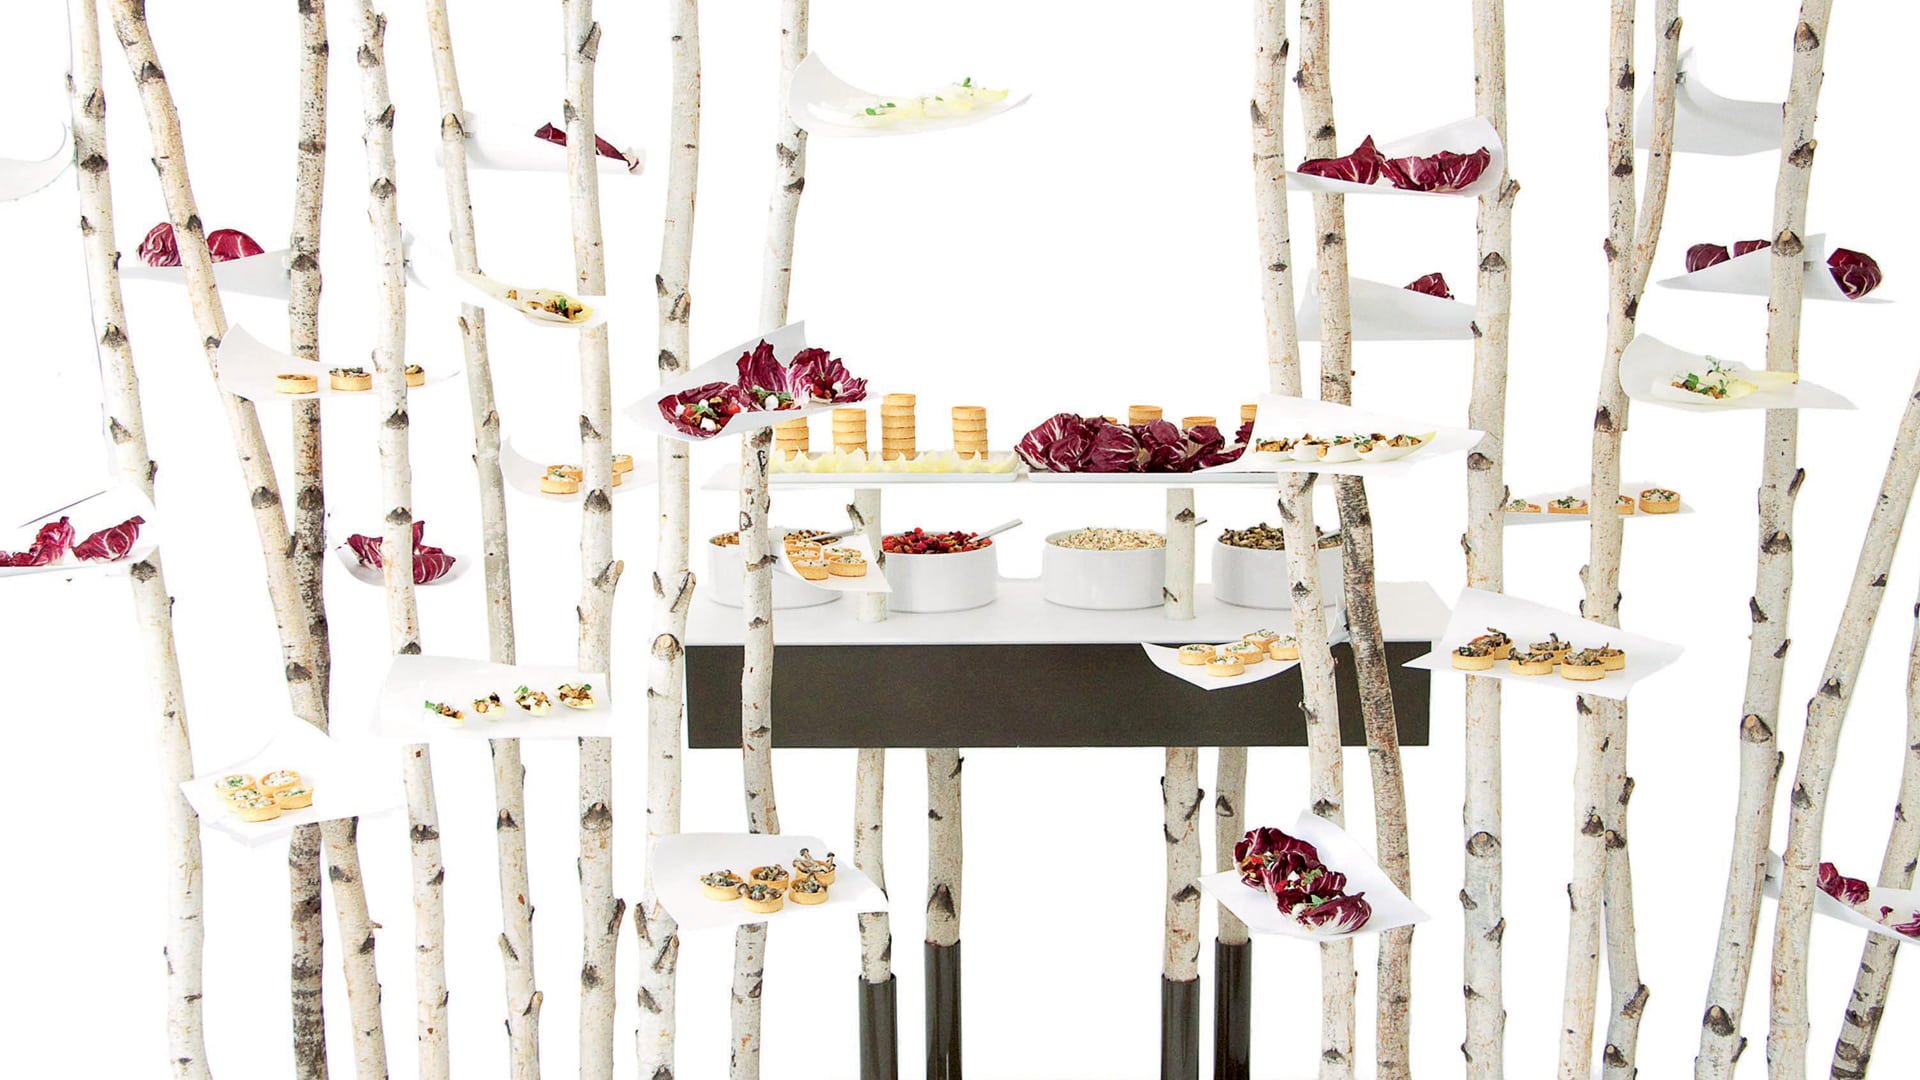 A whimsical edible landscape from NYC’s Pinch Food Design